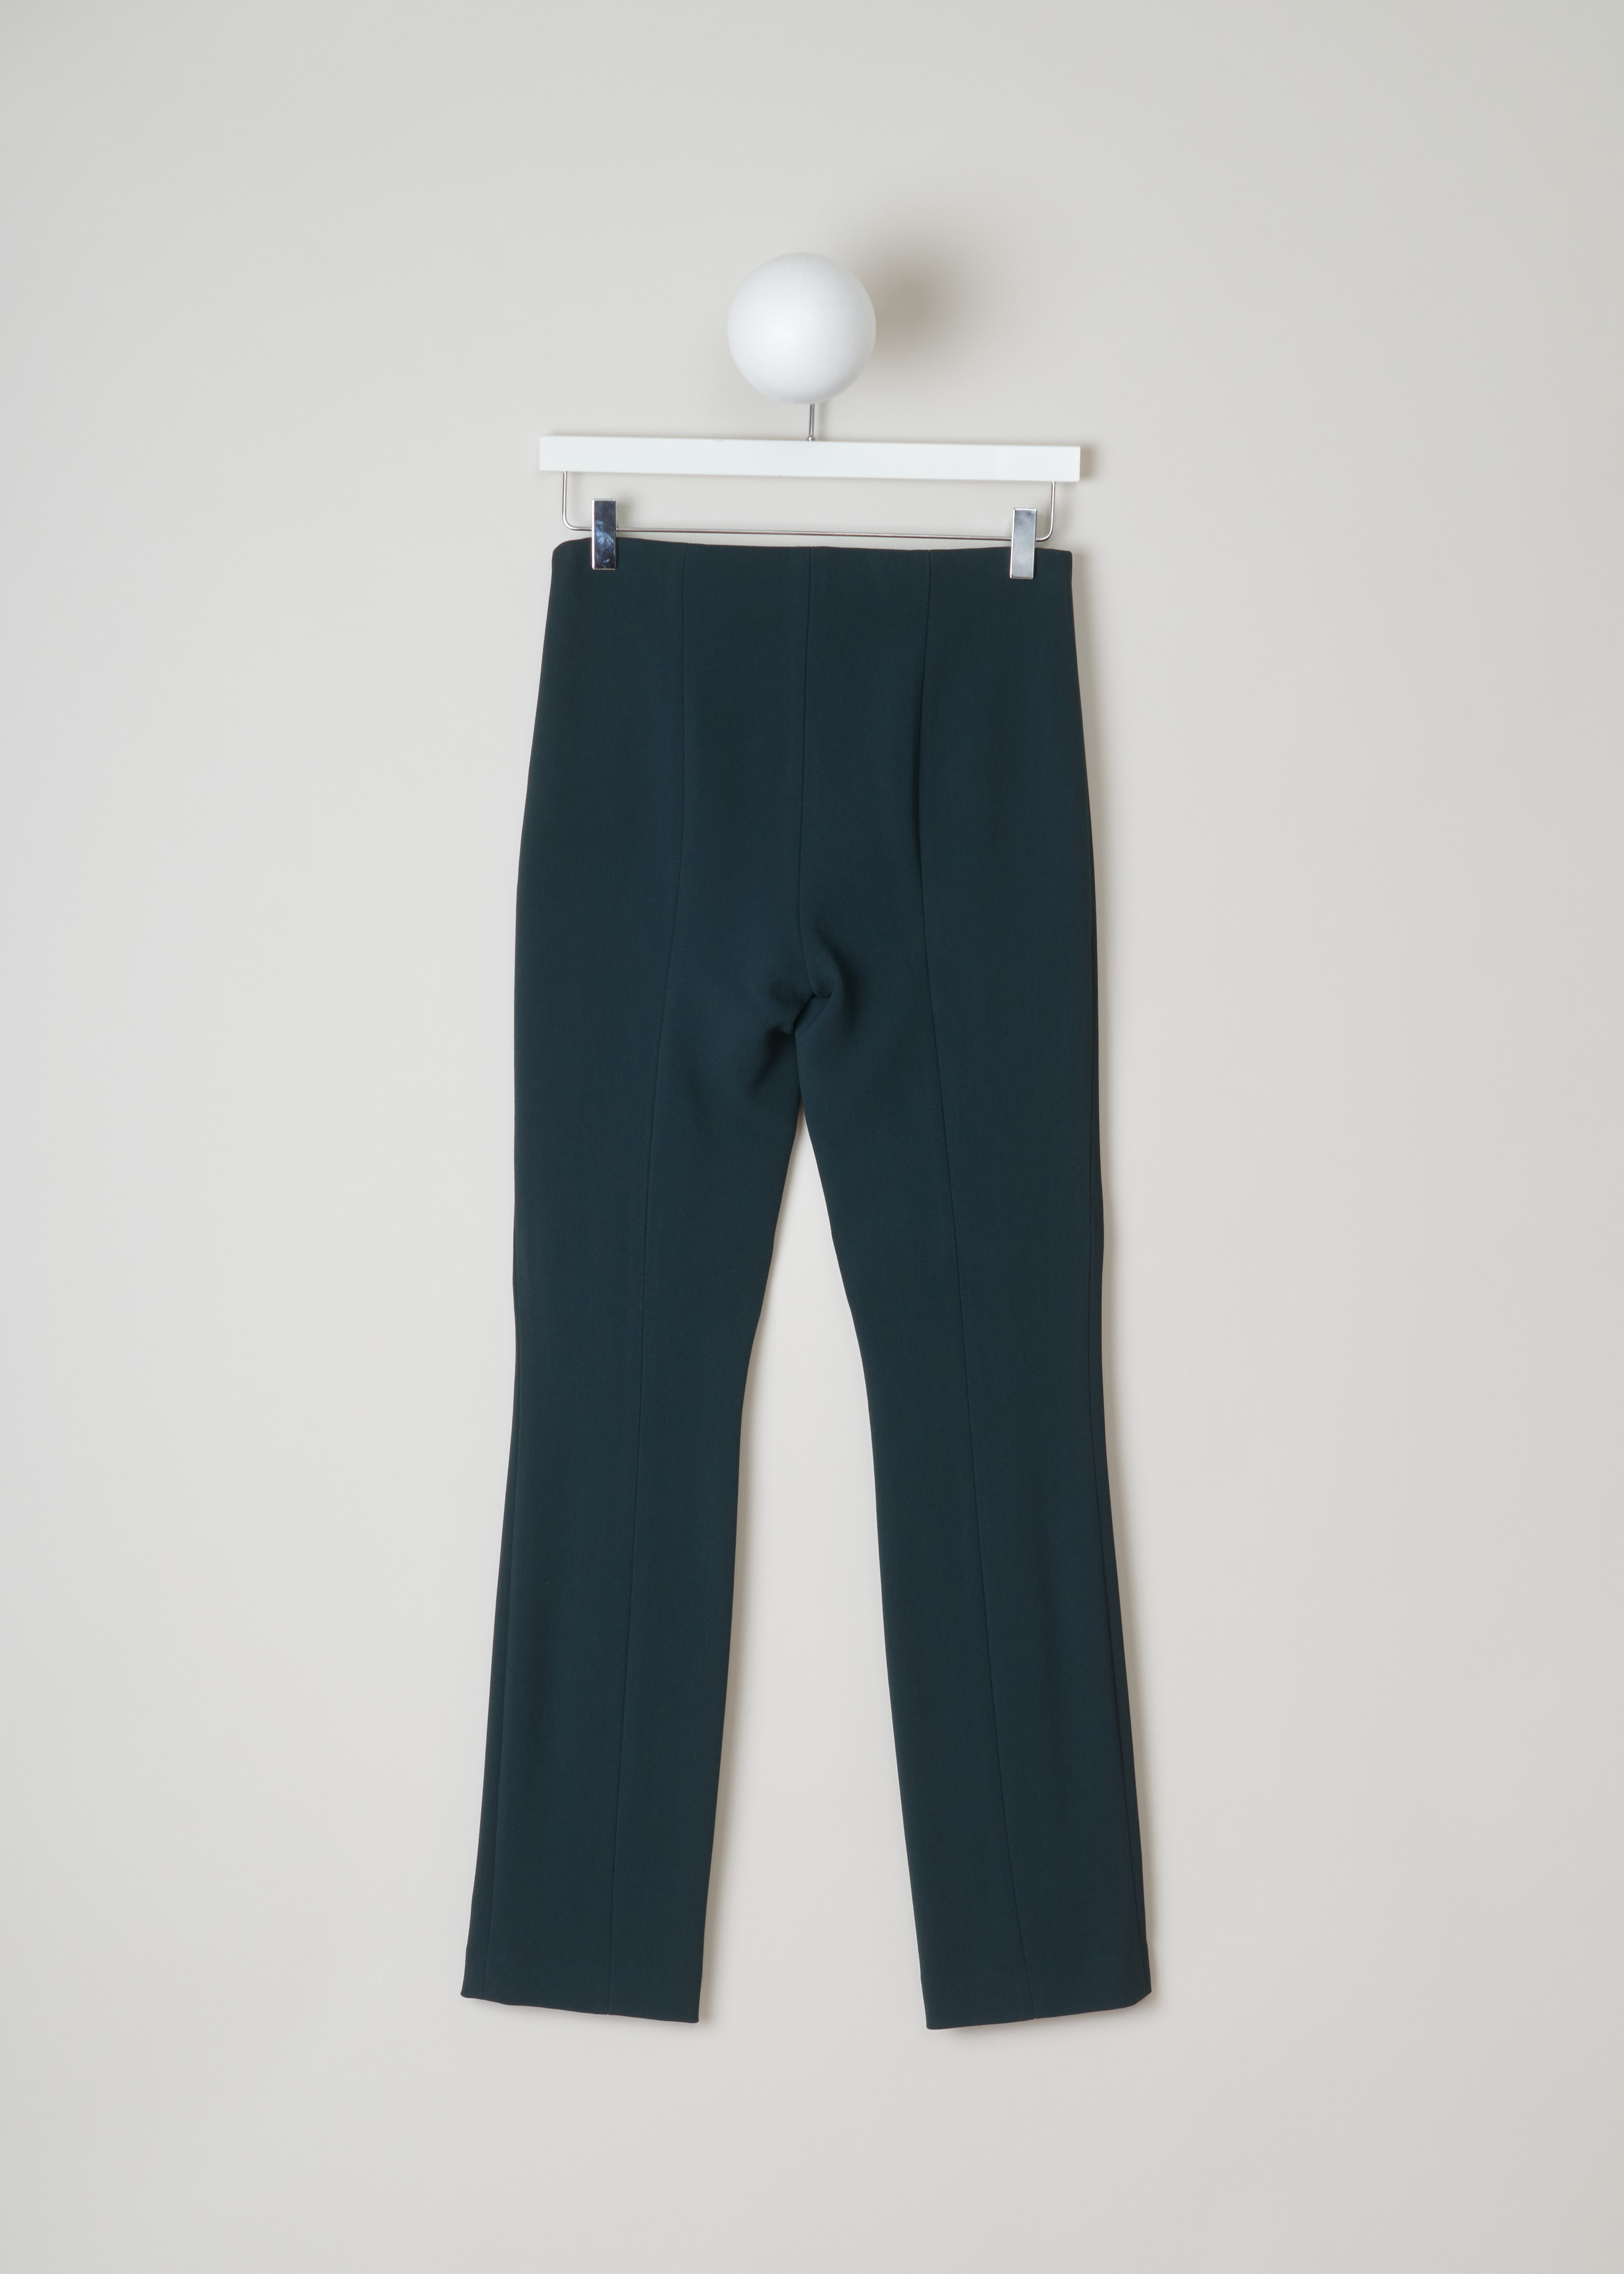 The Row Rona pant in dark green RONA_PANT_4435WI_I_38_DRK_PCCK_GRN back. Straight fitted Rona pant with a high waist, an ankle length and an invisible zipper fastening on the side.